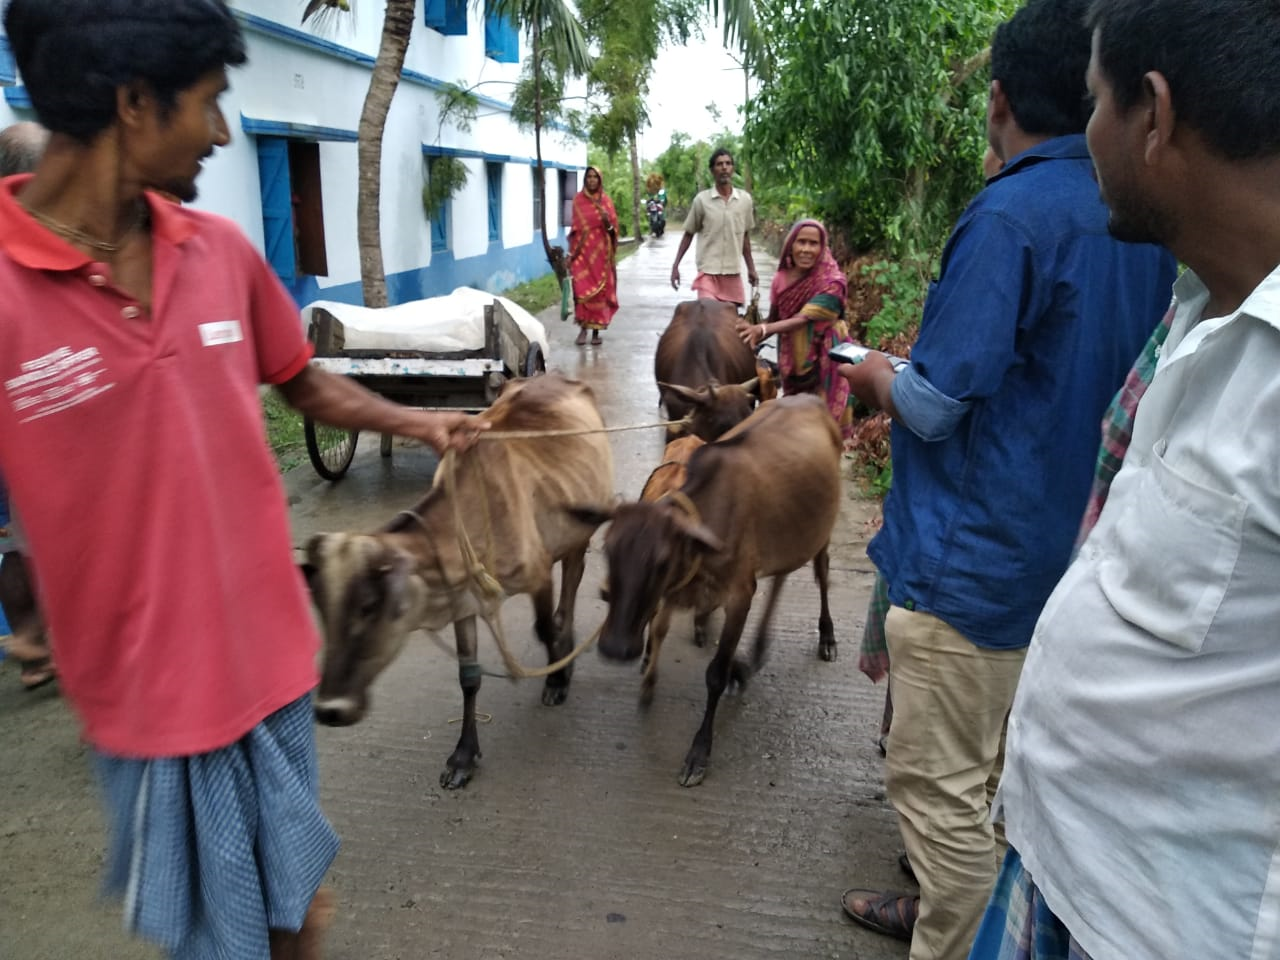 This photo shows villagers walking on the street taking their cattle with them to a safe location